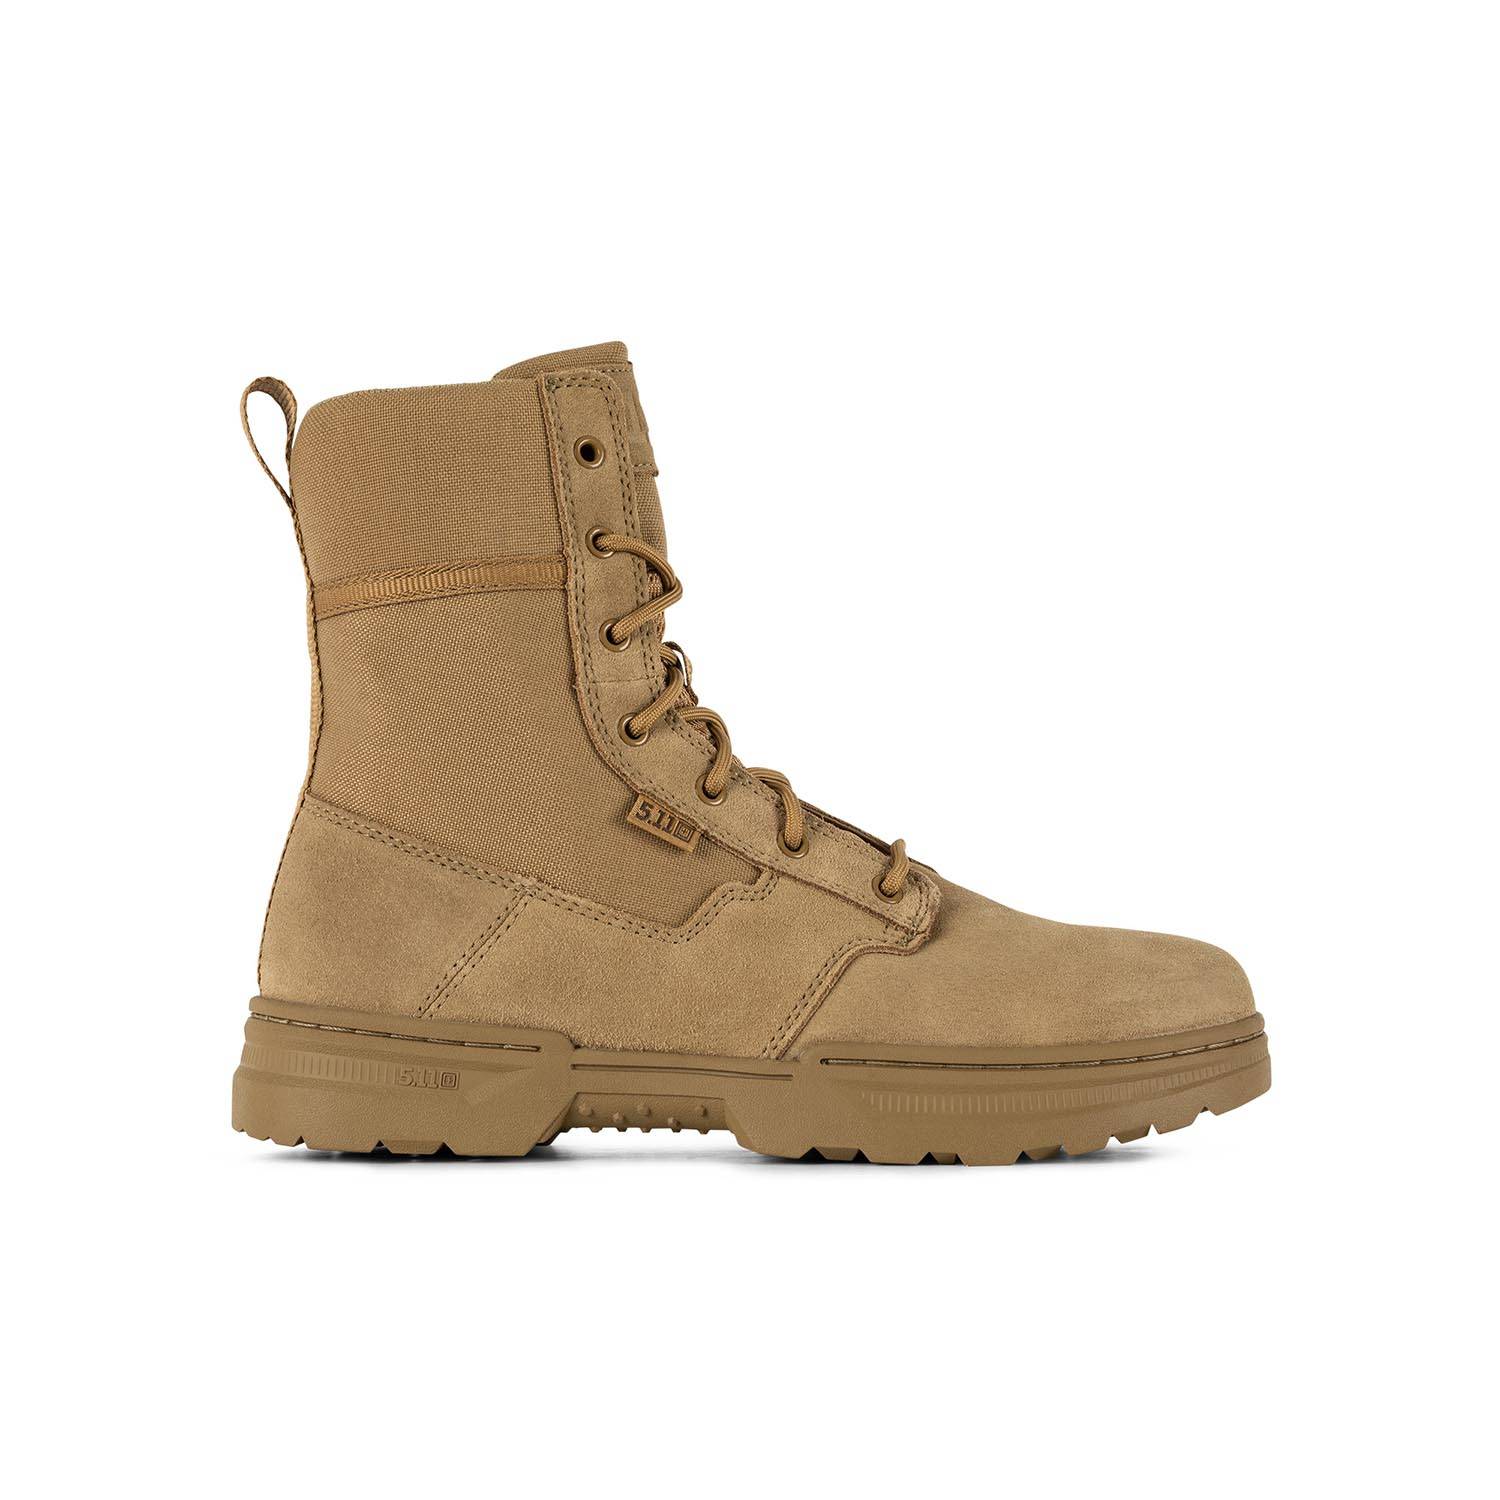 5.11 Tactical 8" Speed Arid Boots 4.0